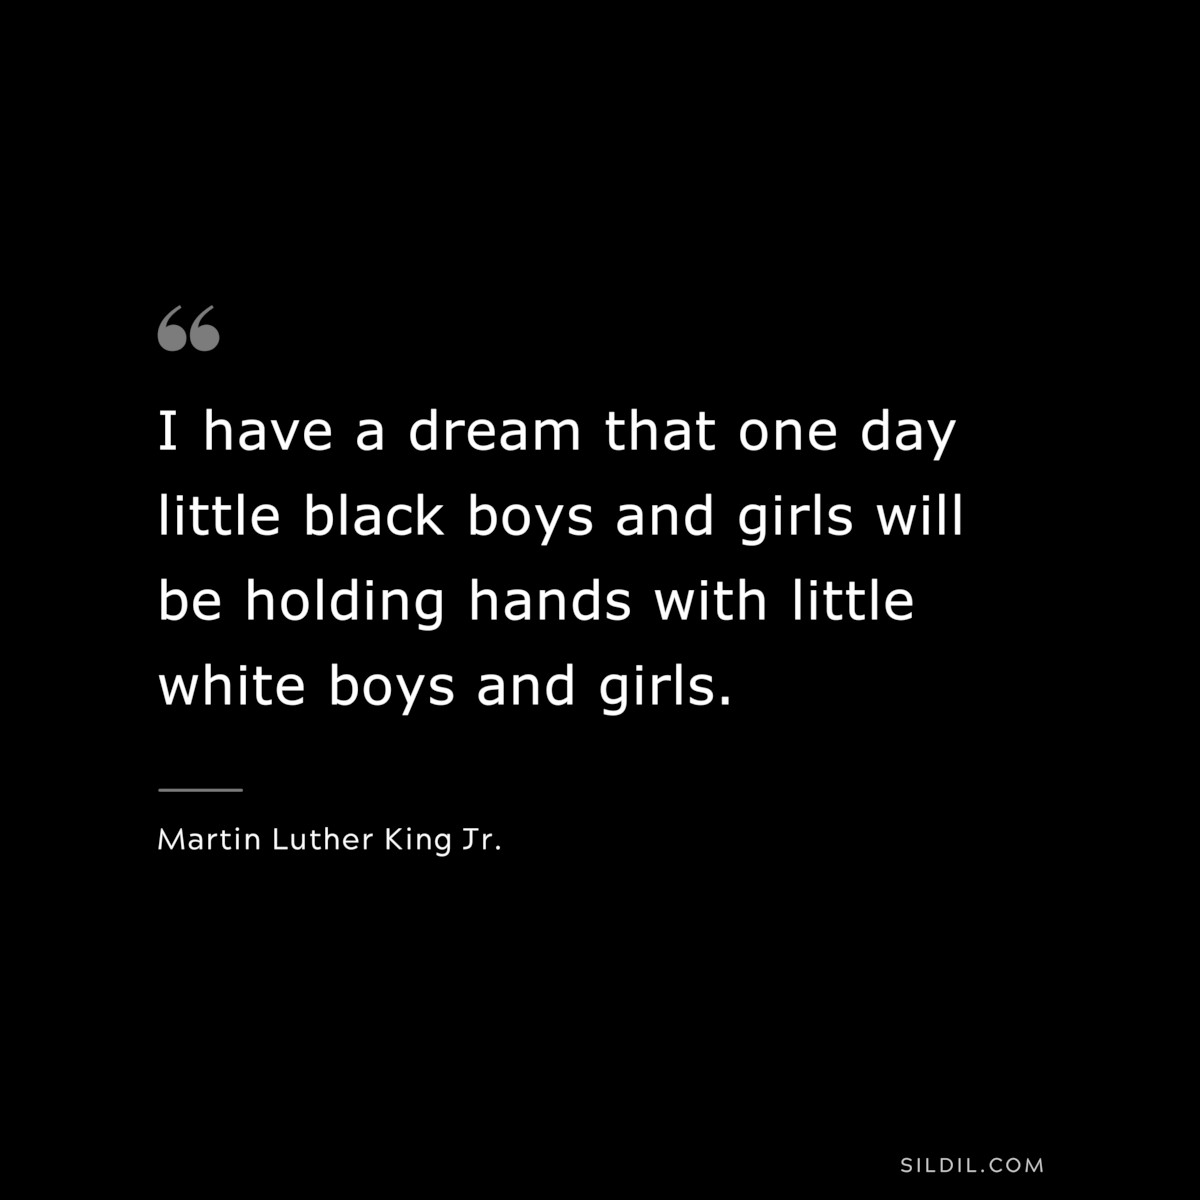 I have a dream that one day little black boys and girls will be holding hands with little white boys and girls. ― Martin Luther King Jr.